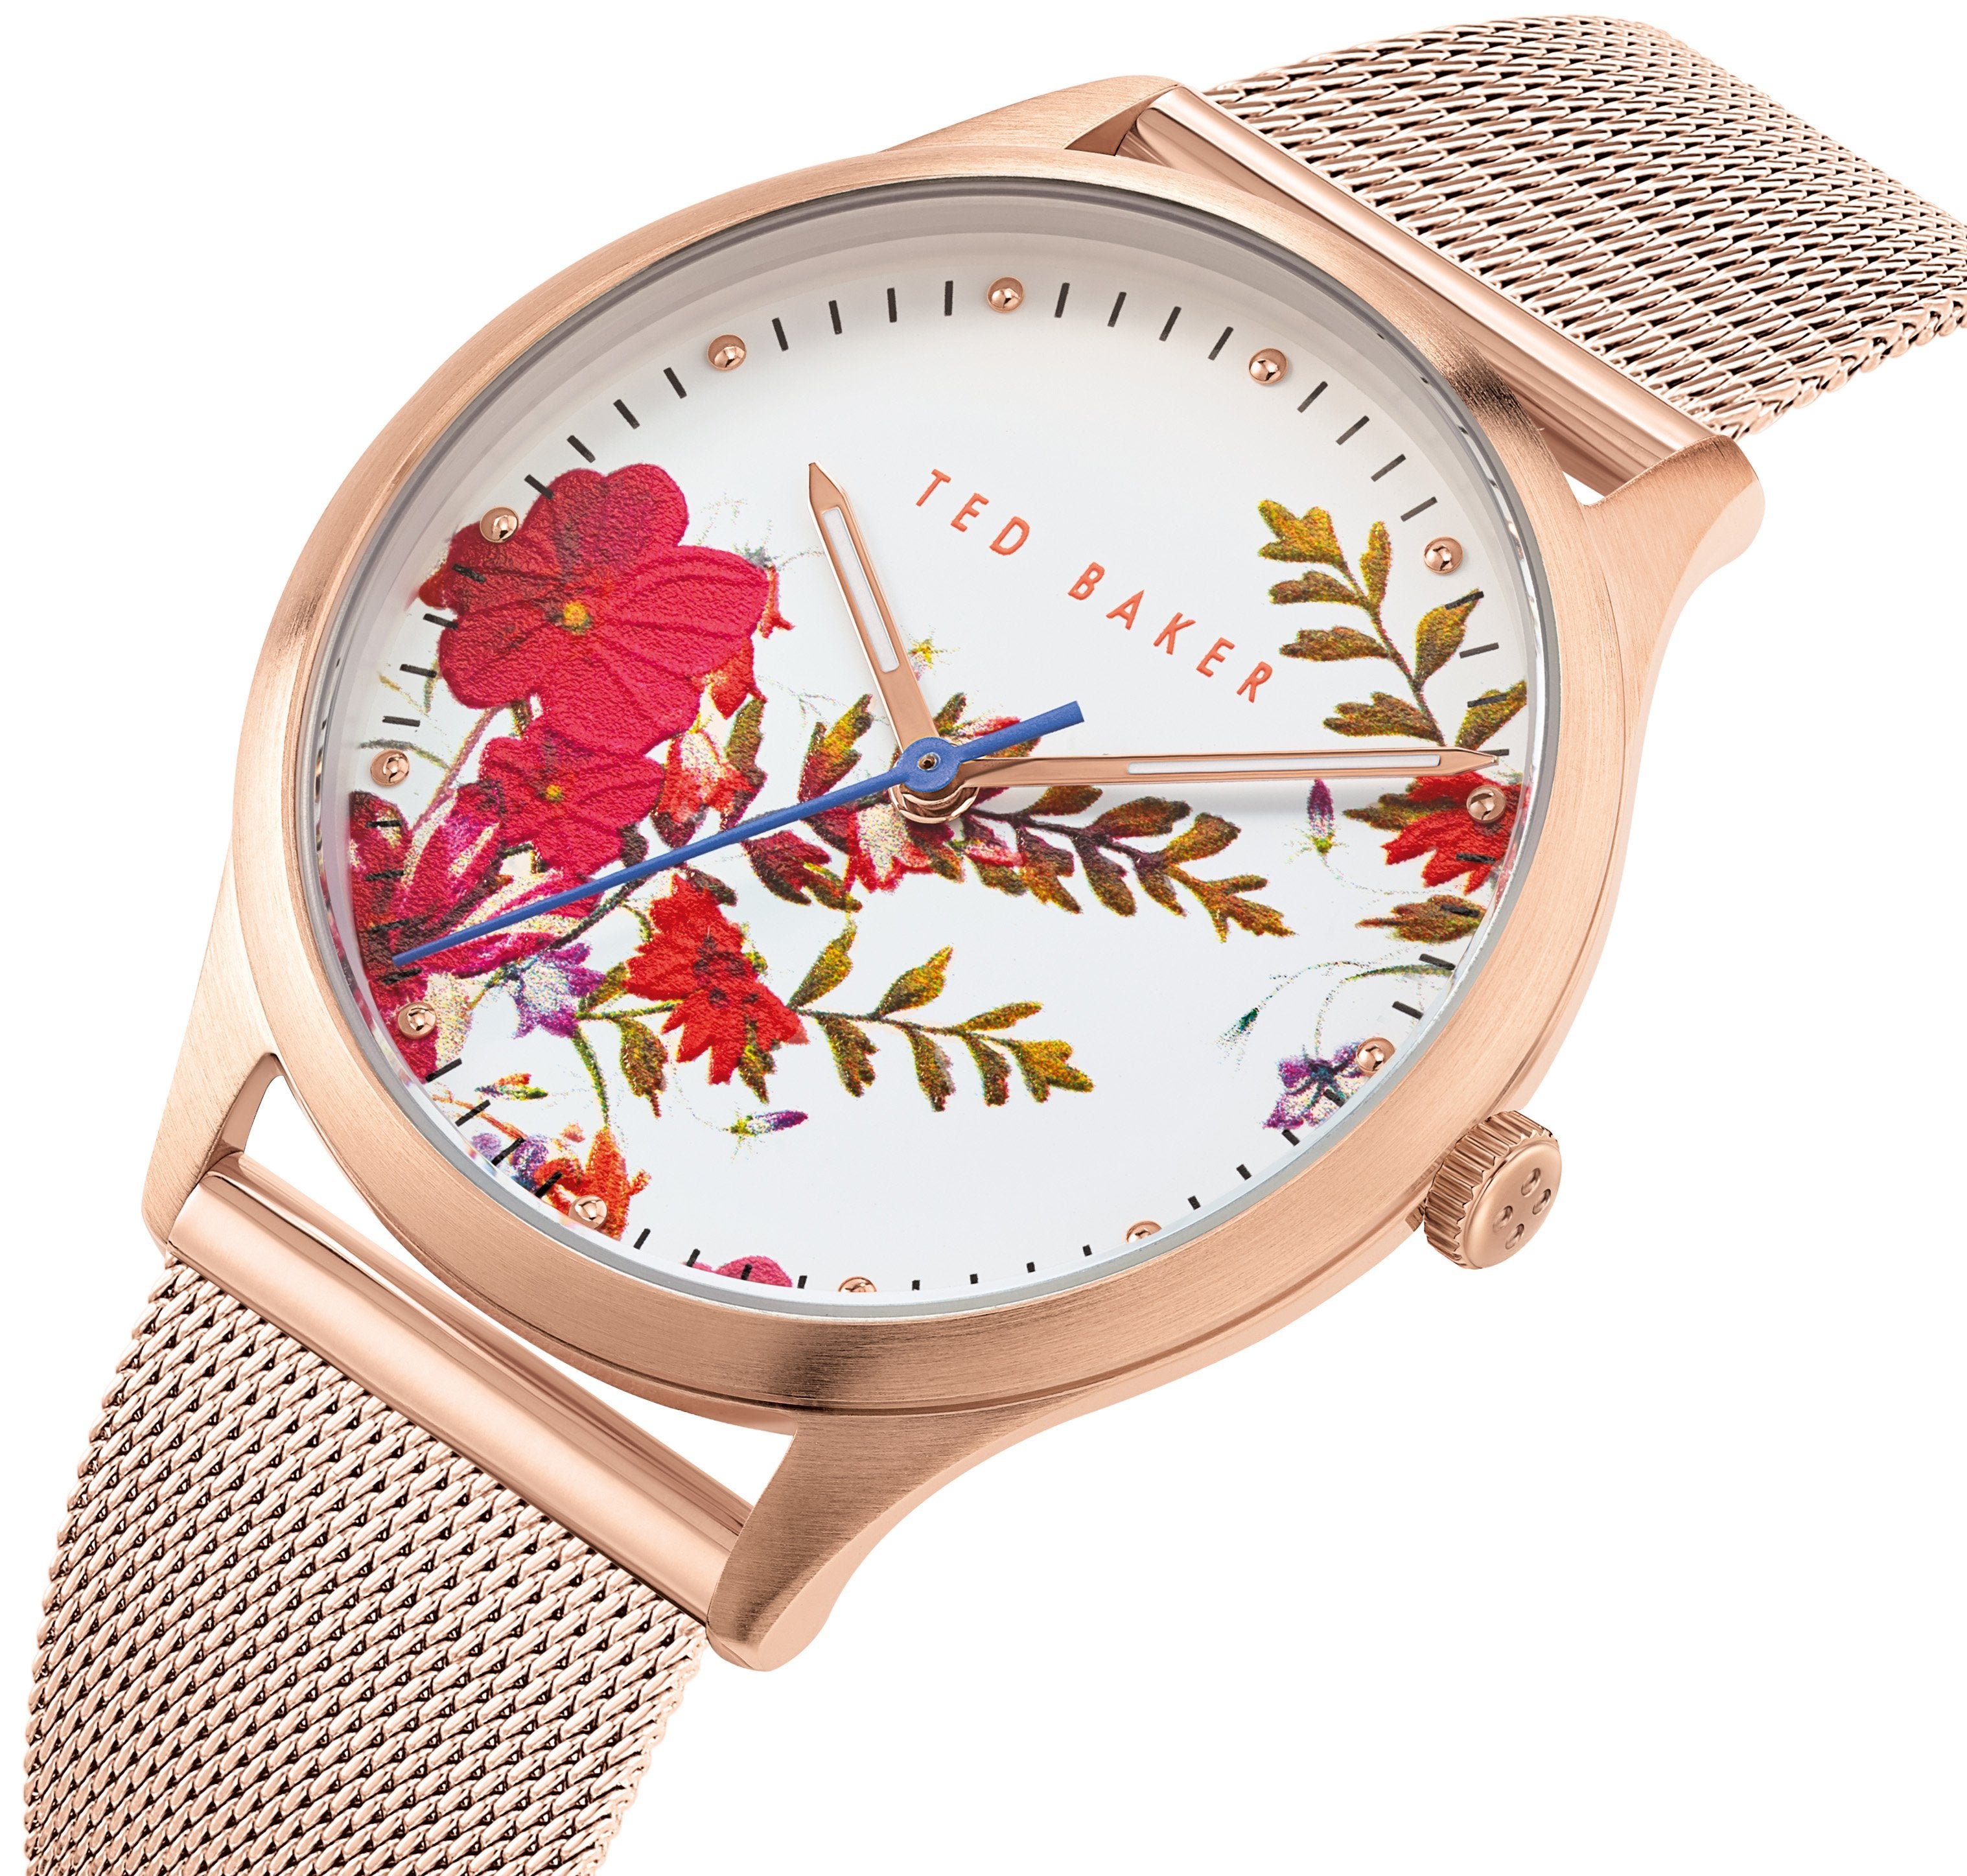 Ted Baker Belgravia Floral Gold Mesh Watch